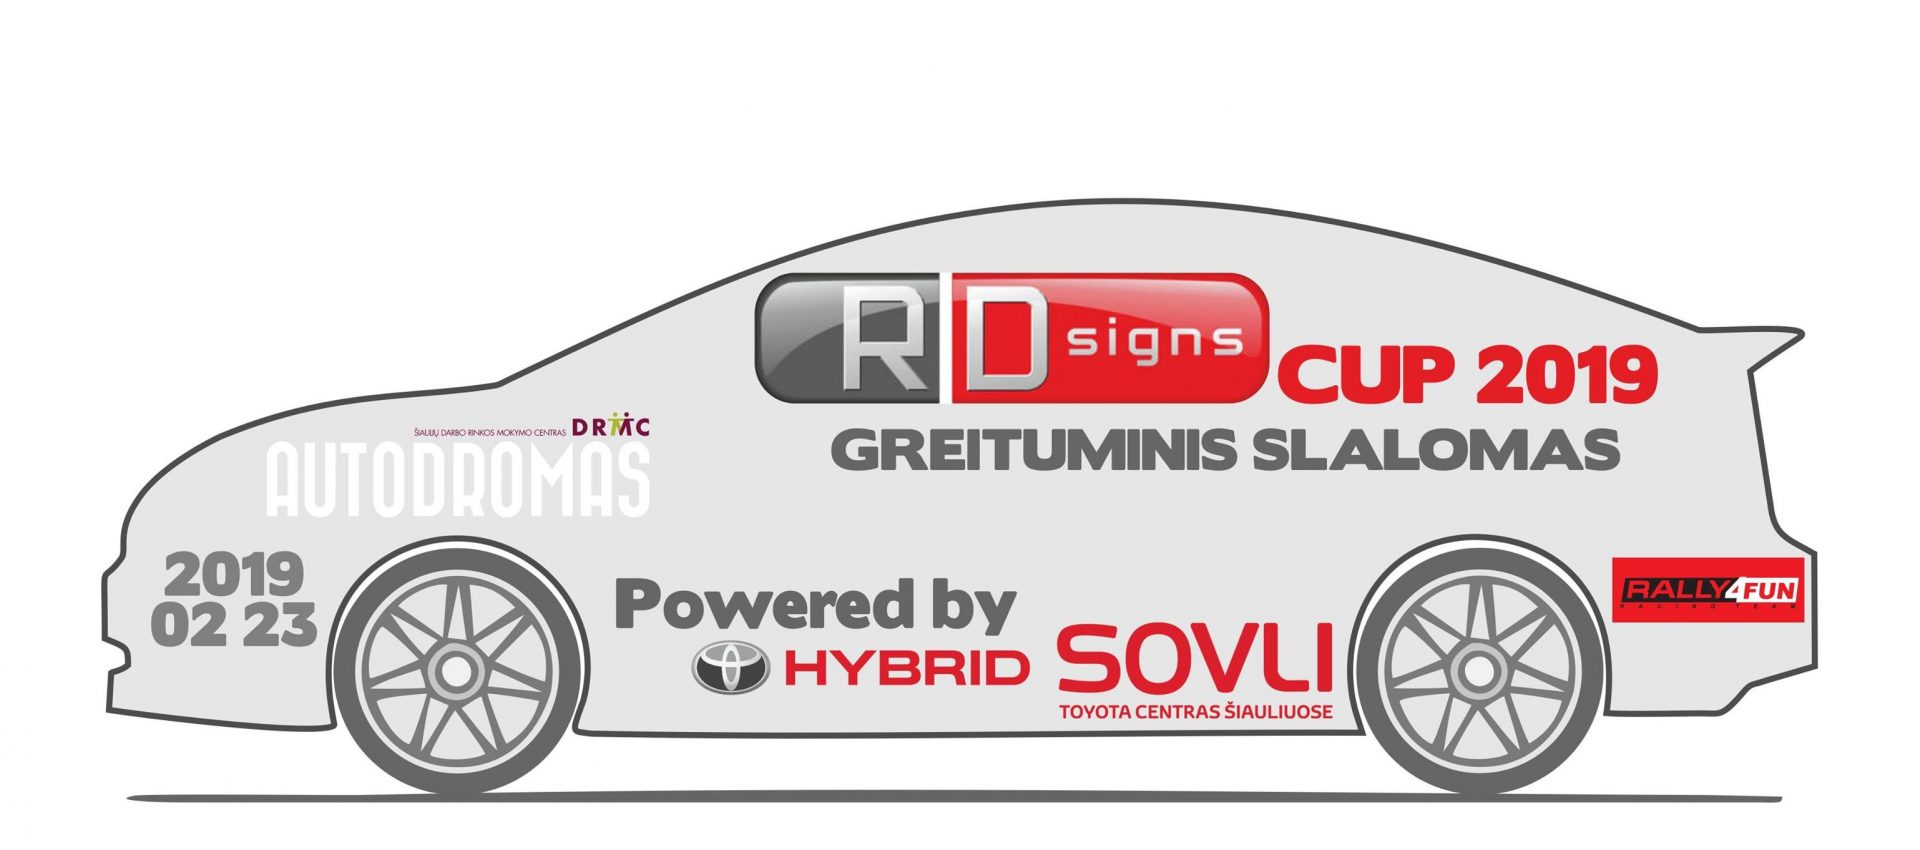 RD signs CUP 2019 powered by Toyota